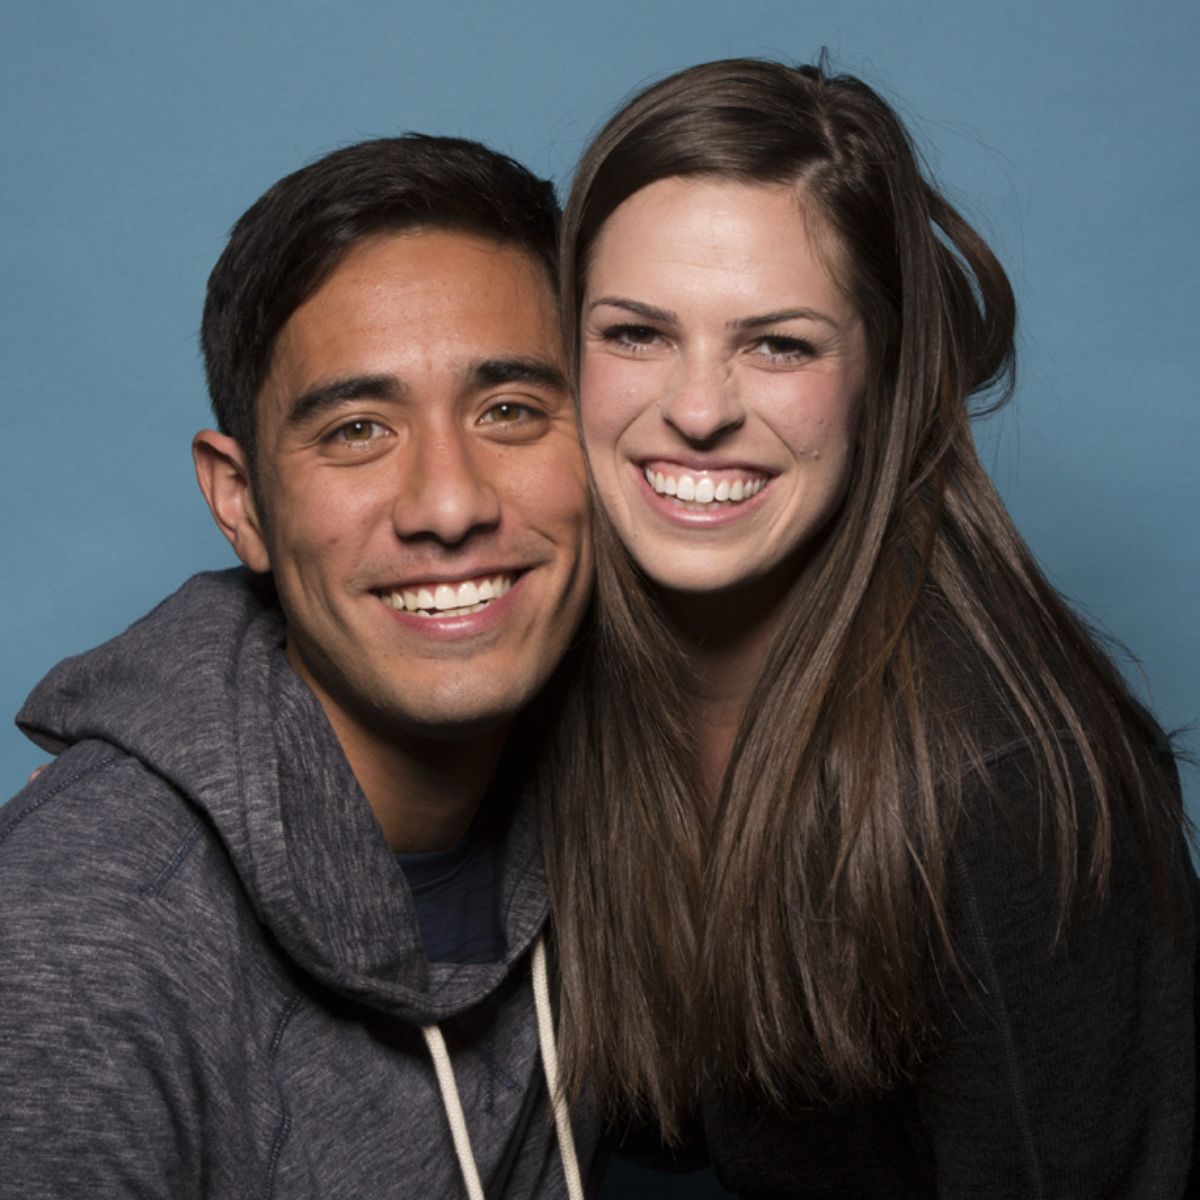 who is zach king's wife